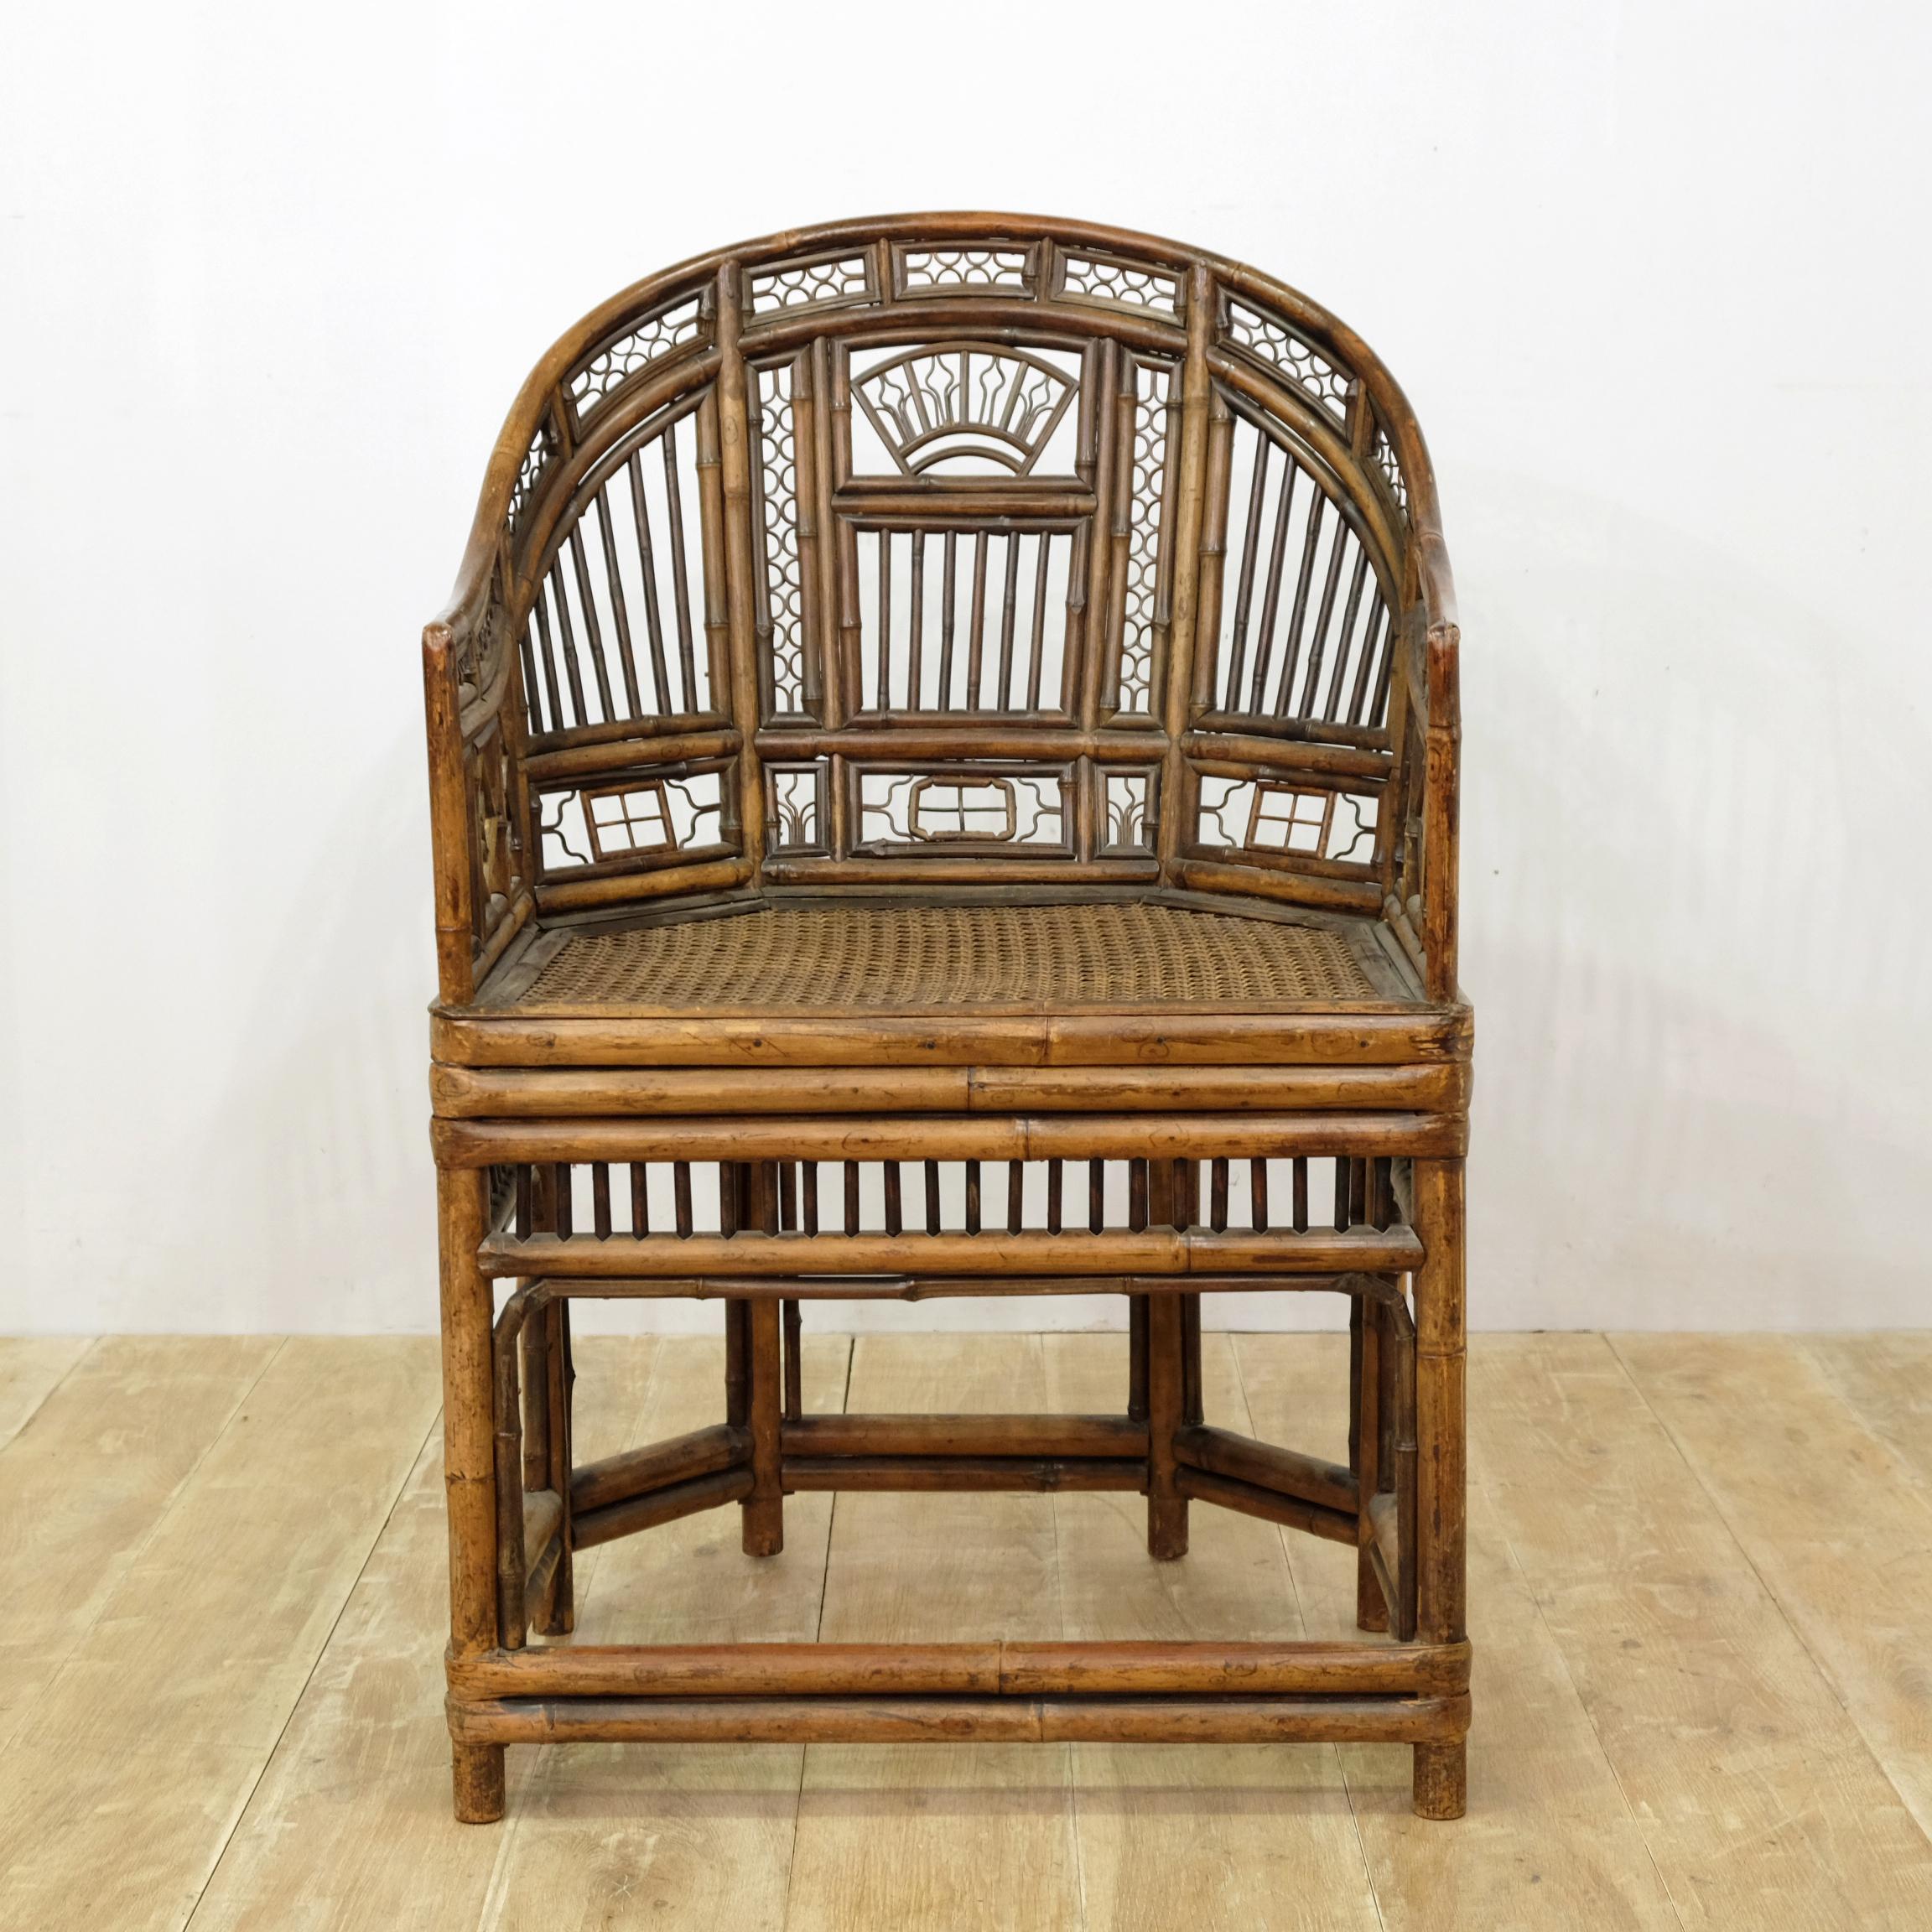 A rare opportunity to own a piece of British history.
A Regency period bamboo ‘Brighton Pavilion’ chair. Early 19th century.

An exquisite chair with stunning detail. After comparing every last tiny and individual detail, we believe this actual